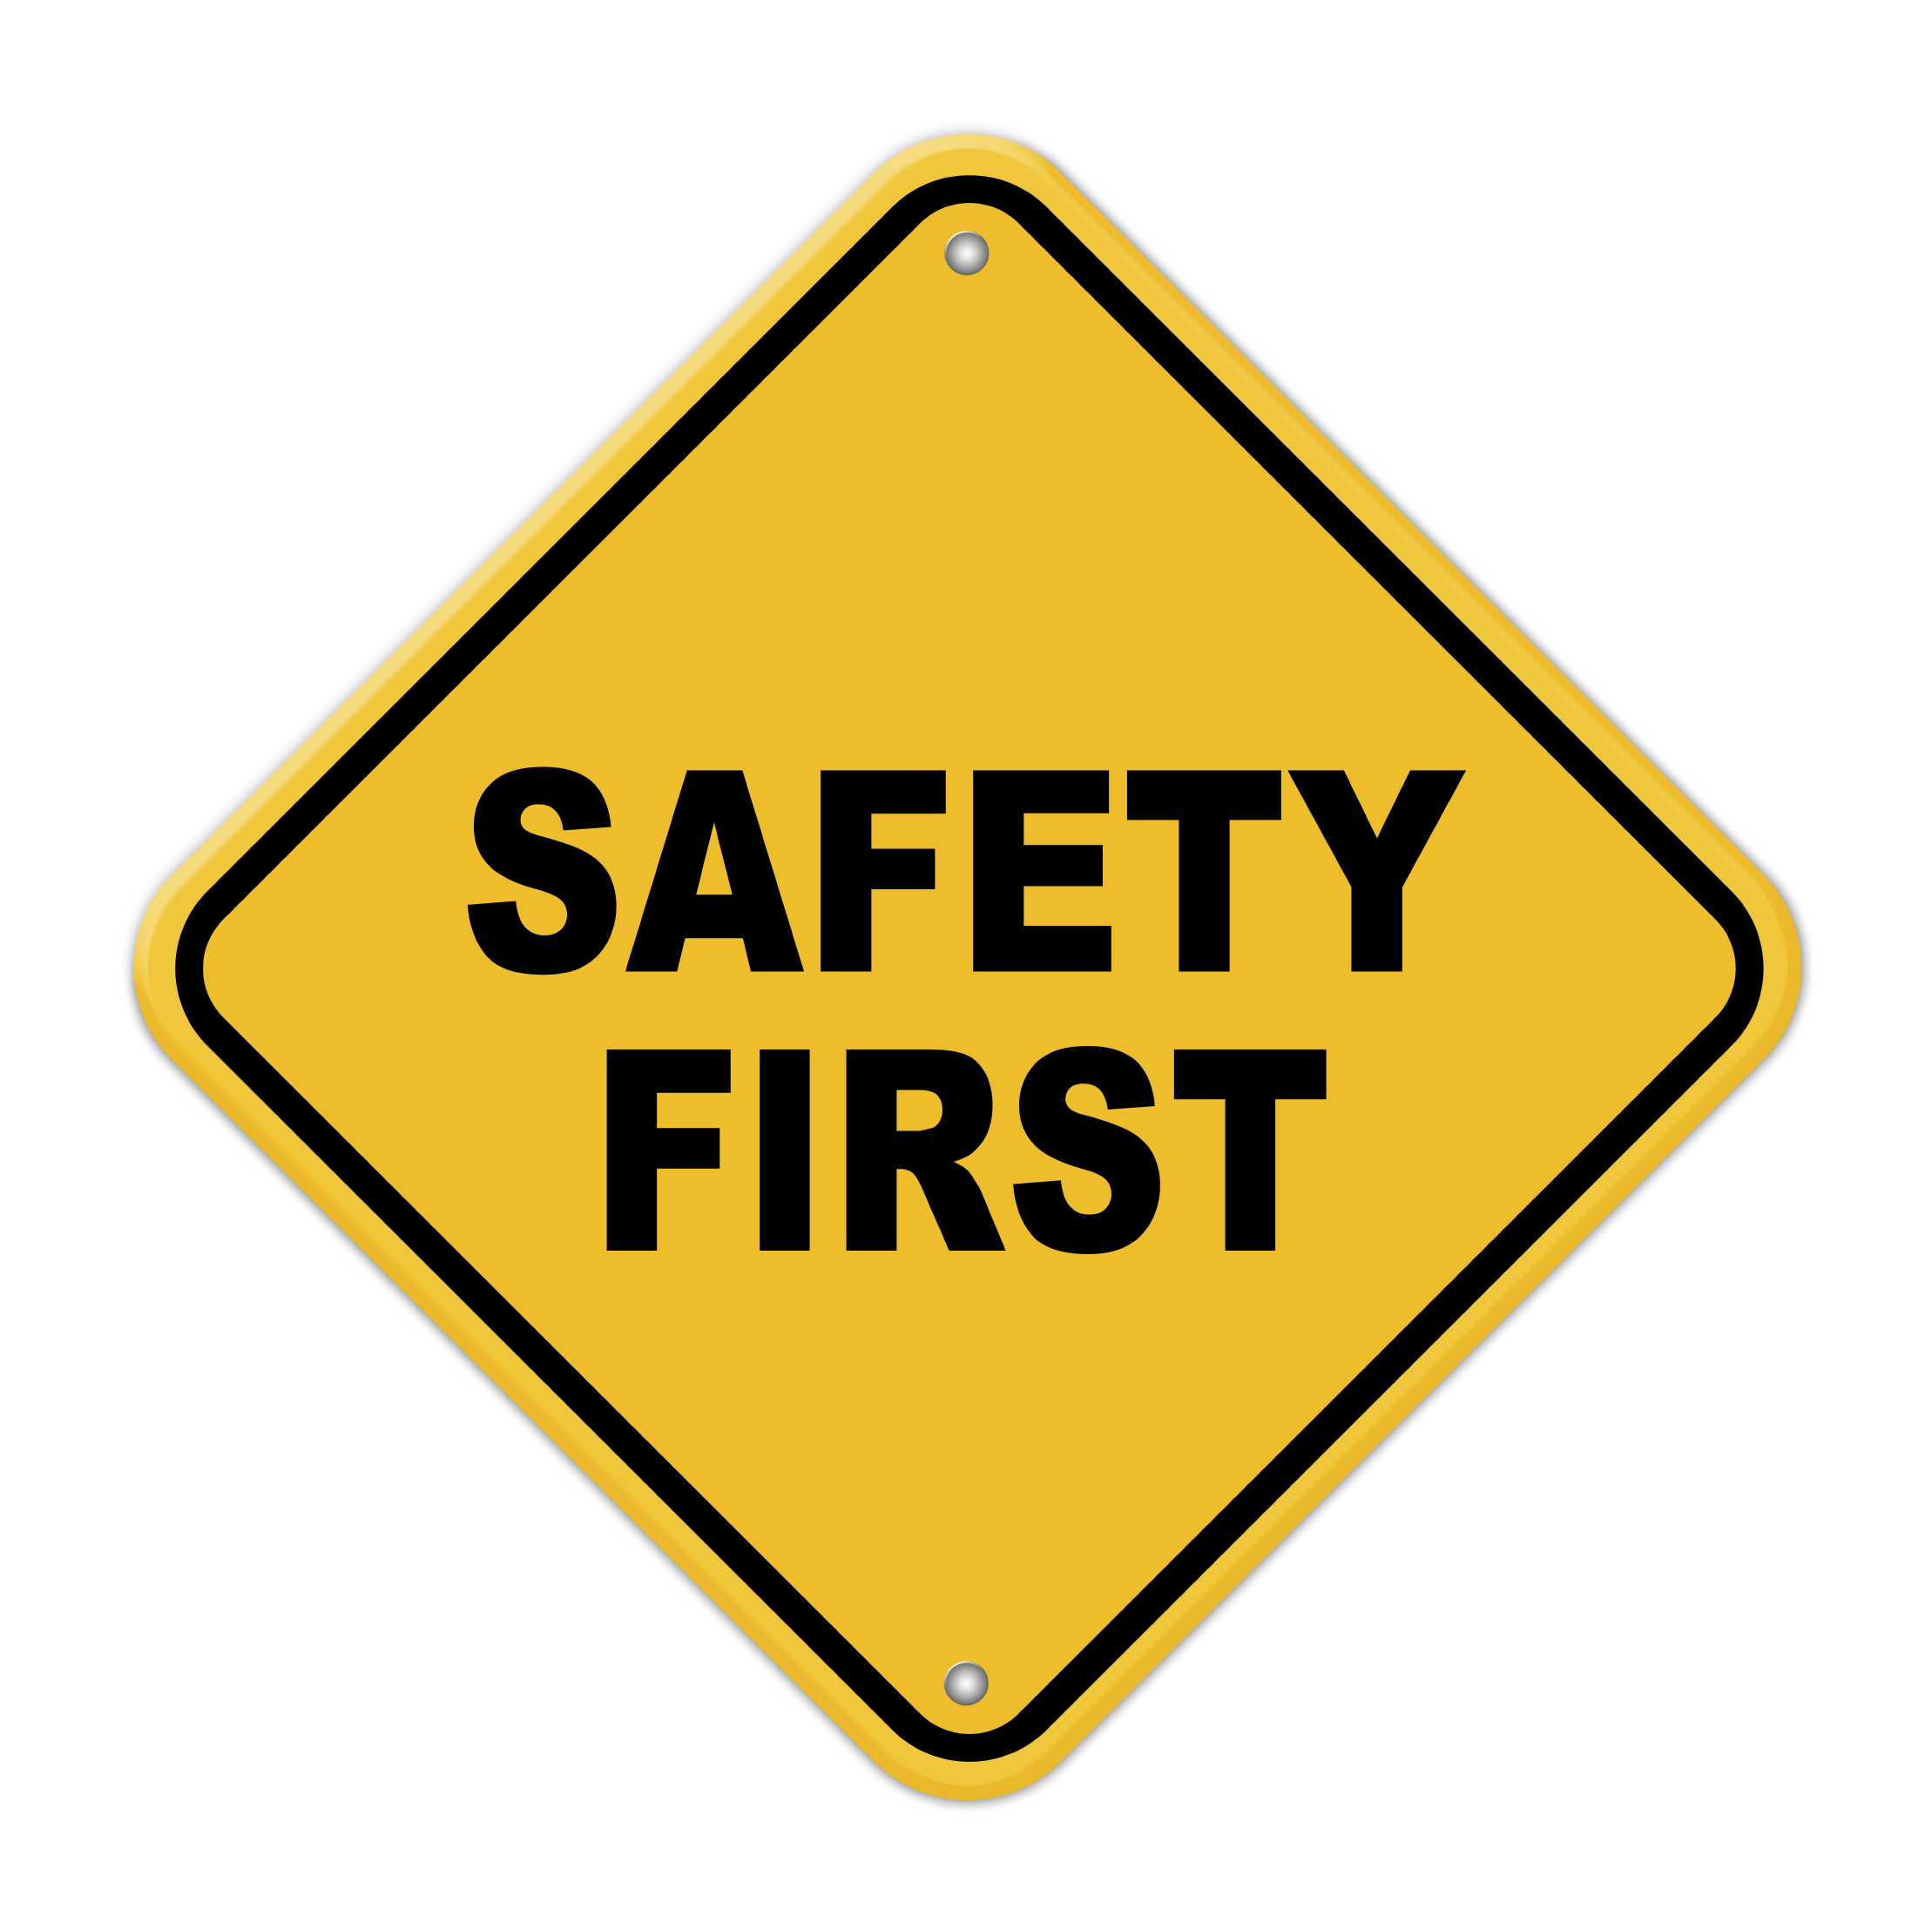 10 Workplace Safety Training Tips